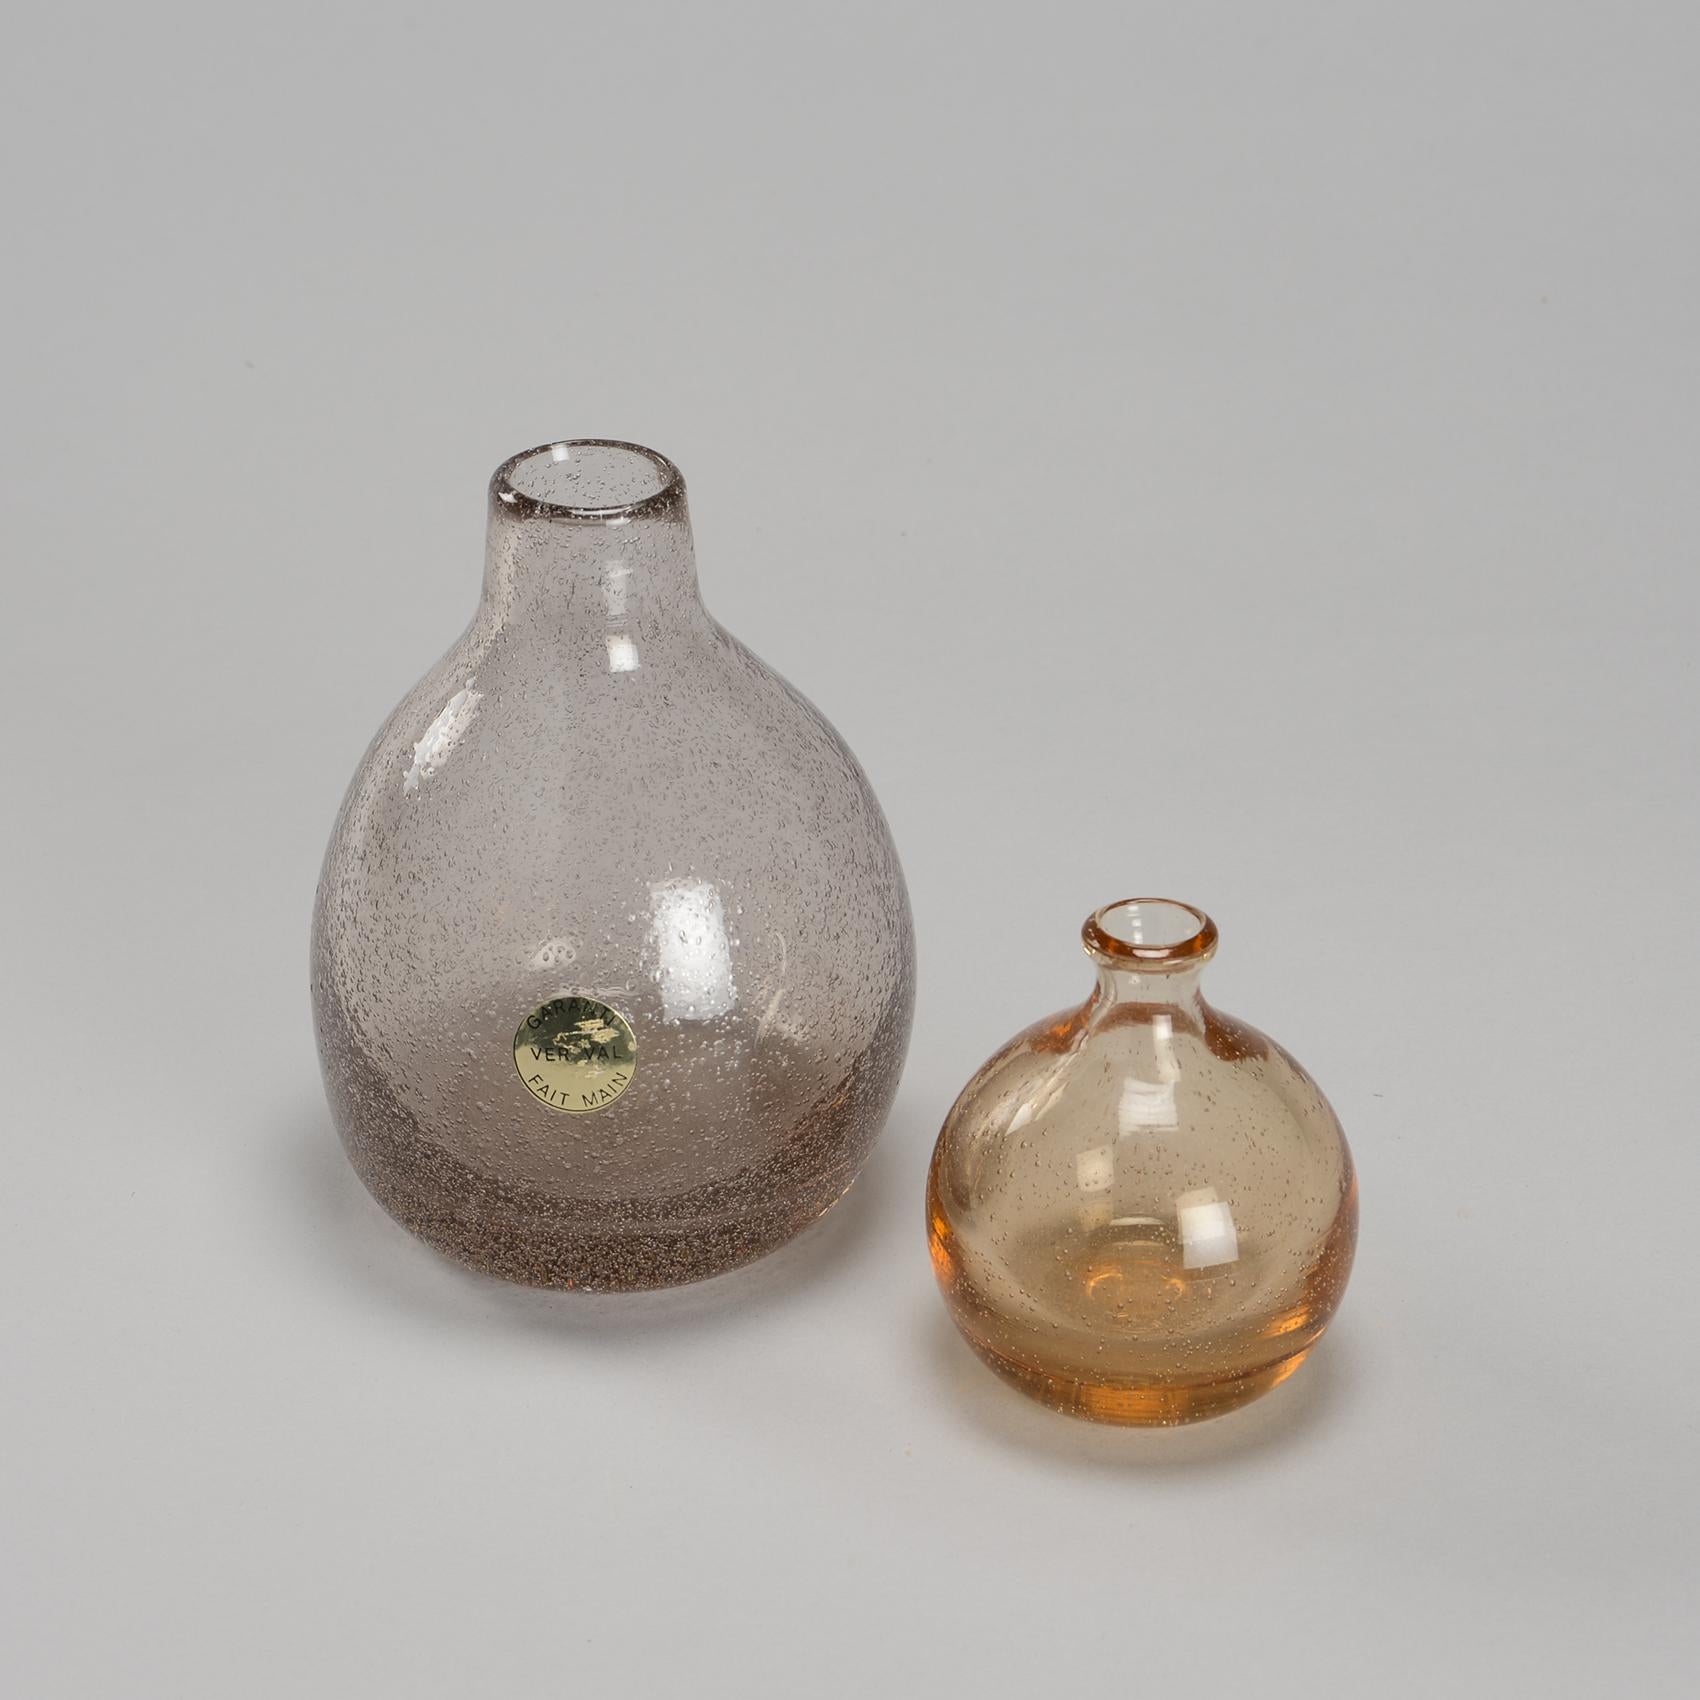 Thick blown glass soliflore and vase, signed Verval Vallauris, by Alexandre Kostanda, French ceramist, when he started working on glassware. This pieces are quite rare.

Small vase : 4.3 